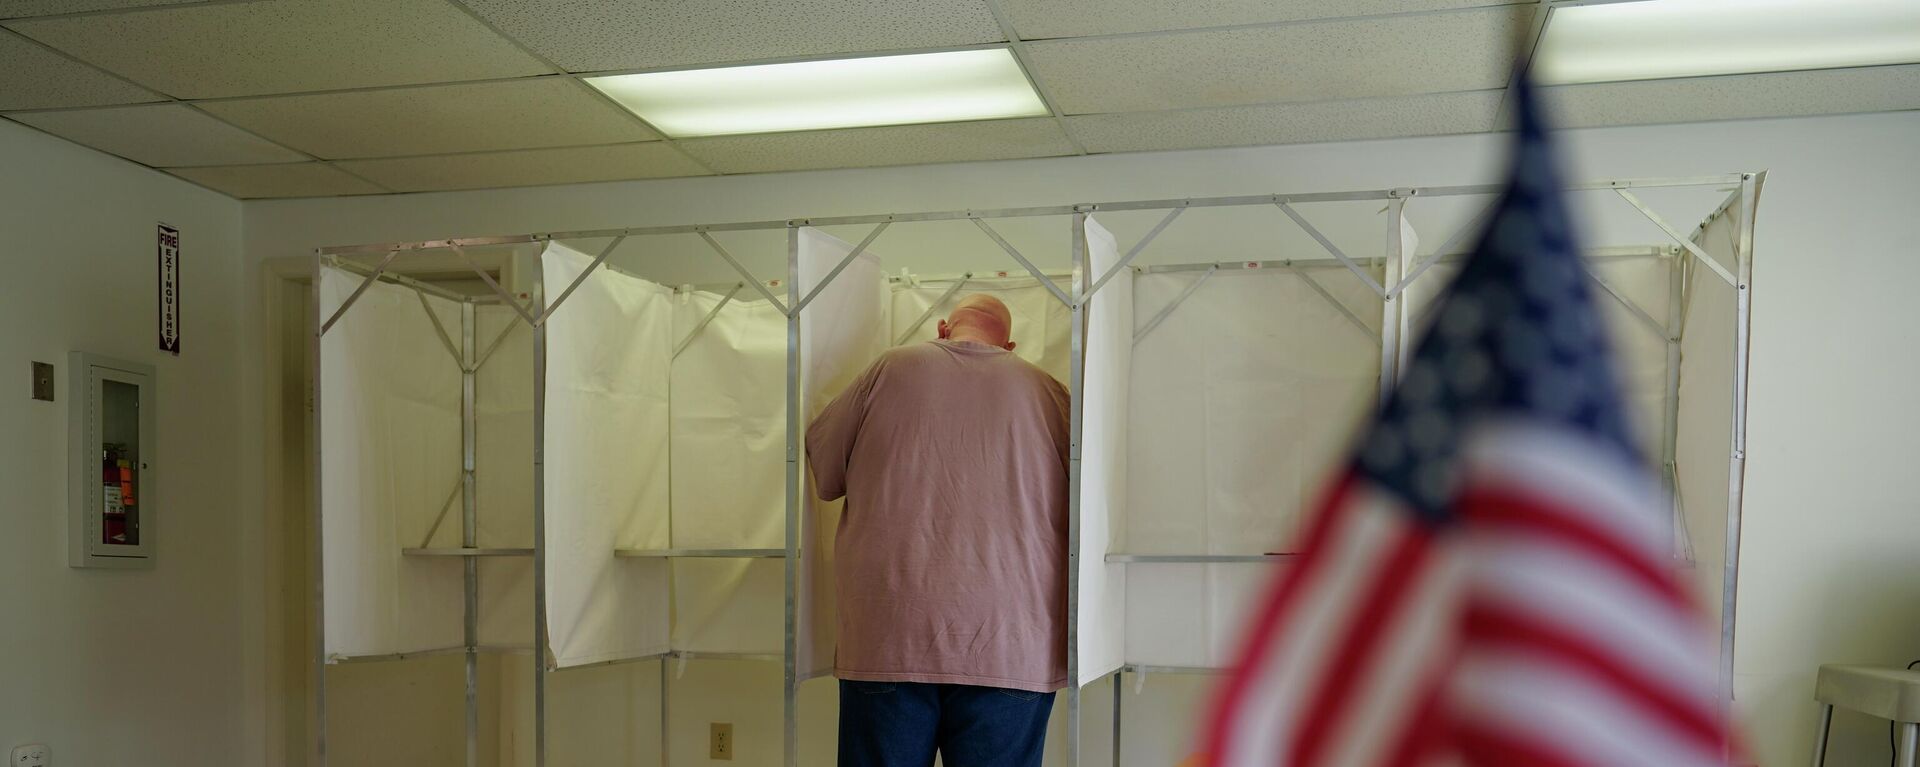 FILE - A voter fills out a ballot during the Pennsylvania primary election at the Michaux Manor Living Center in Fayetteville, Pa., May 17, 2022. As the 2022 midterm elections enter their final two-month sprint, leading Republicans concede that their party's advantage may be slipping even as Democrats confront their president's weak standing, deep voter pessimism and the weight of history this fall. - Sputnik International, 1920, 02.08.2023